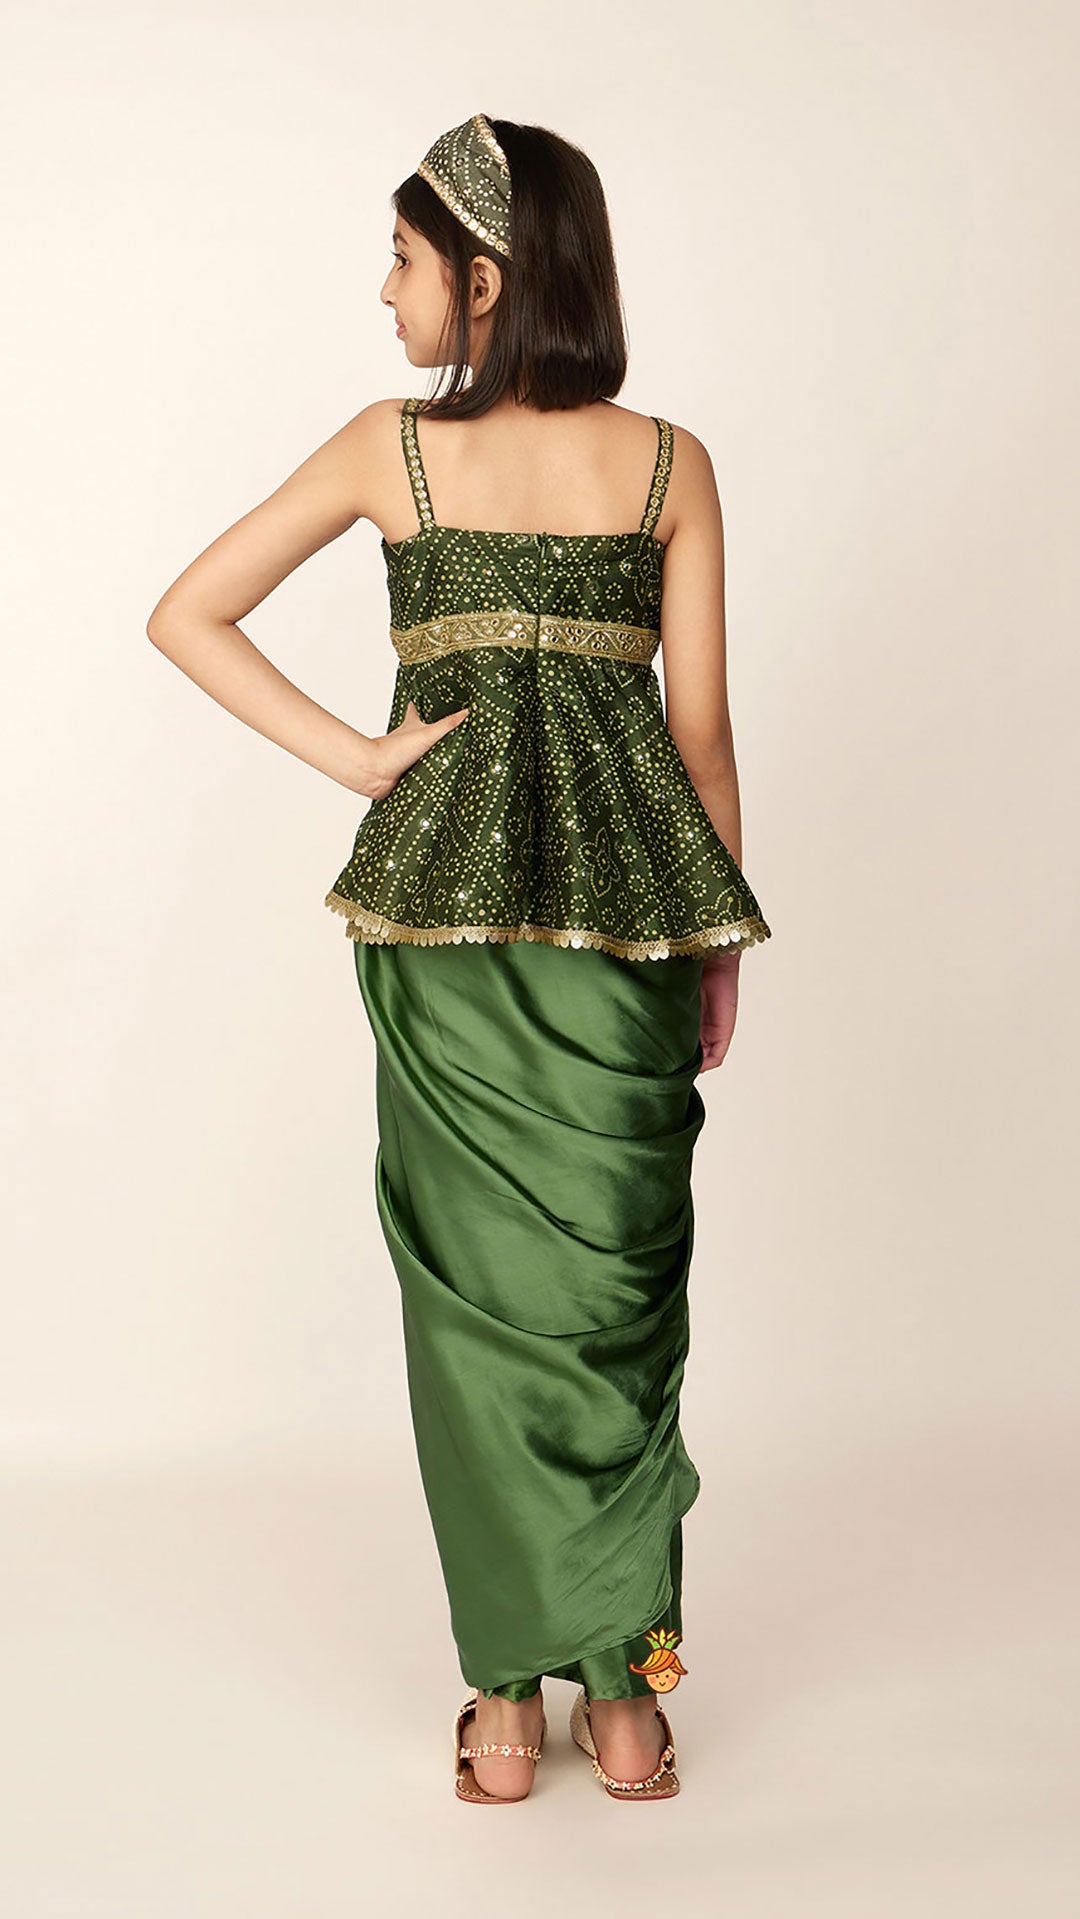 Faux Mirror Work Mehendi Green Top And Stylish Dhoti Skirt With Matching Hair Band